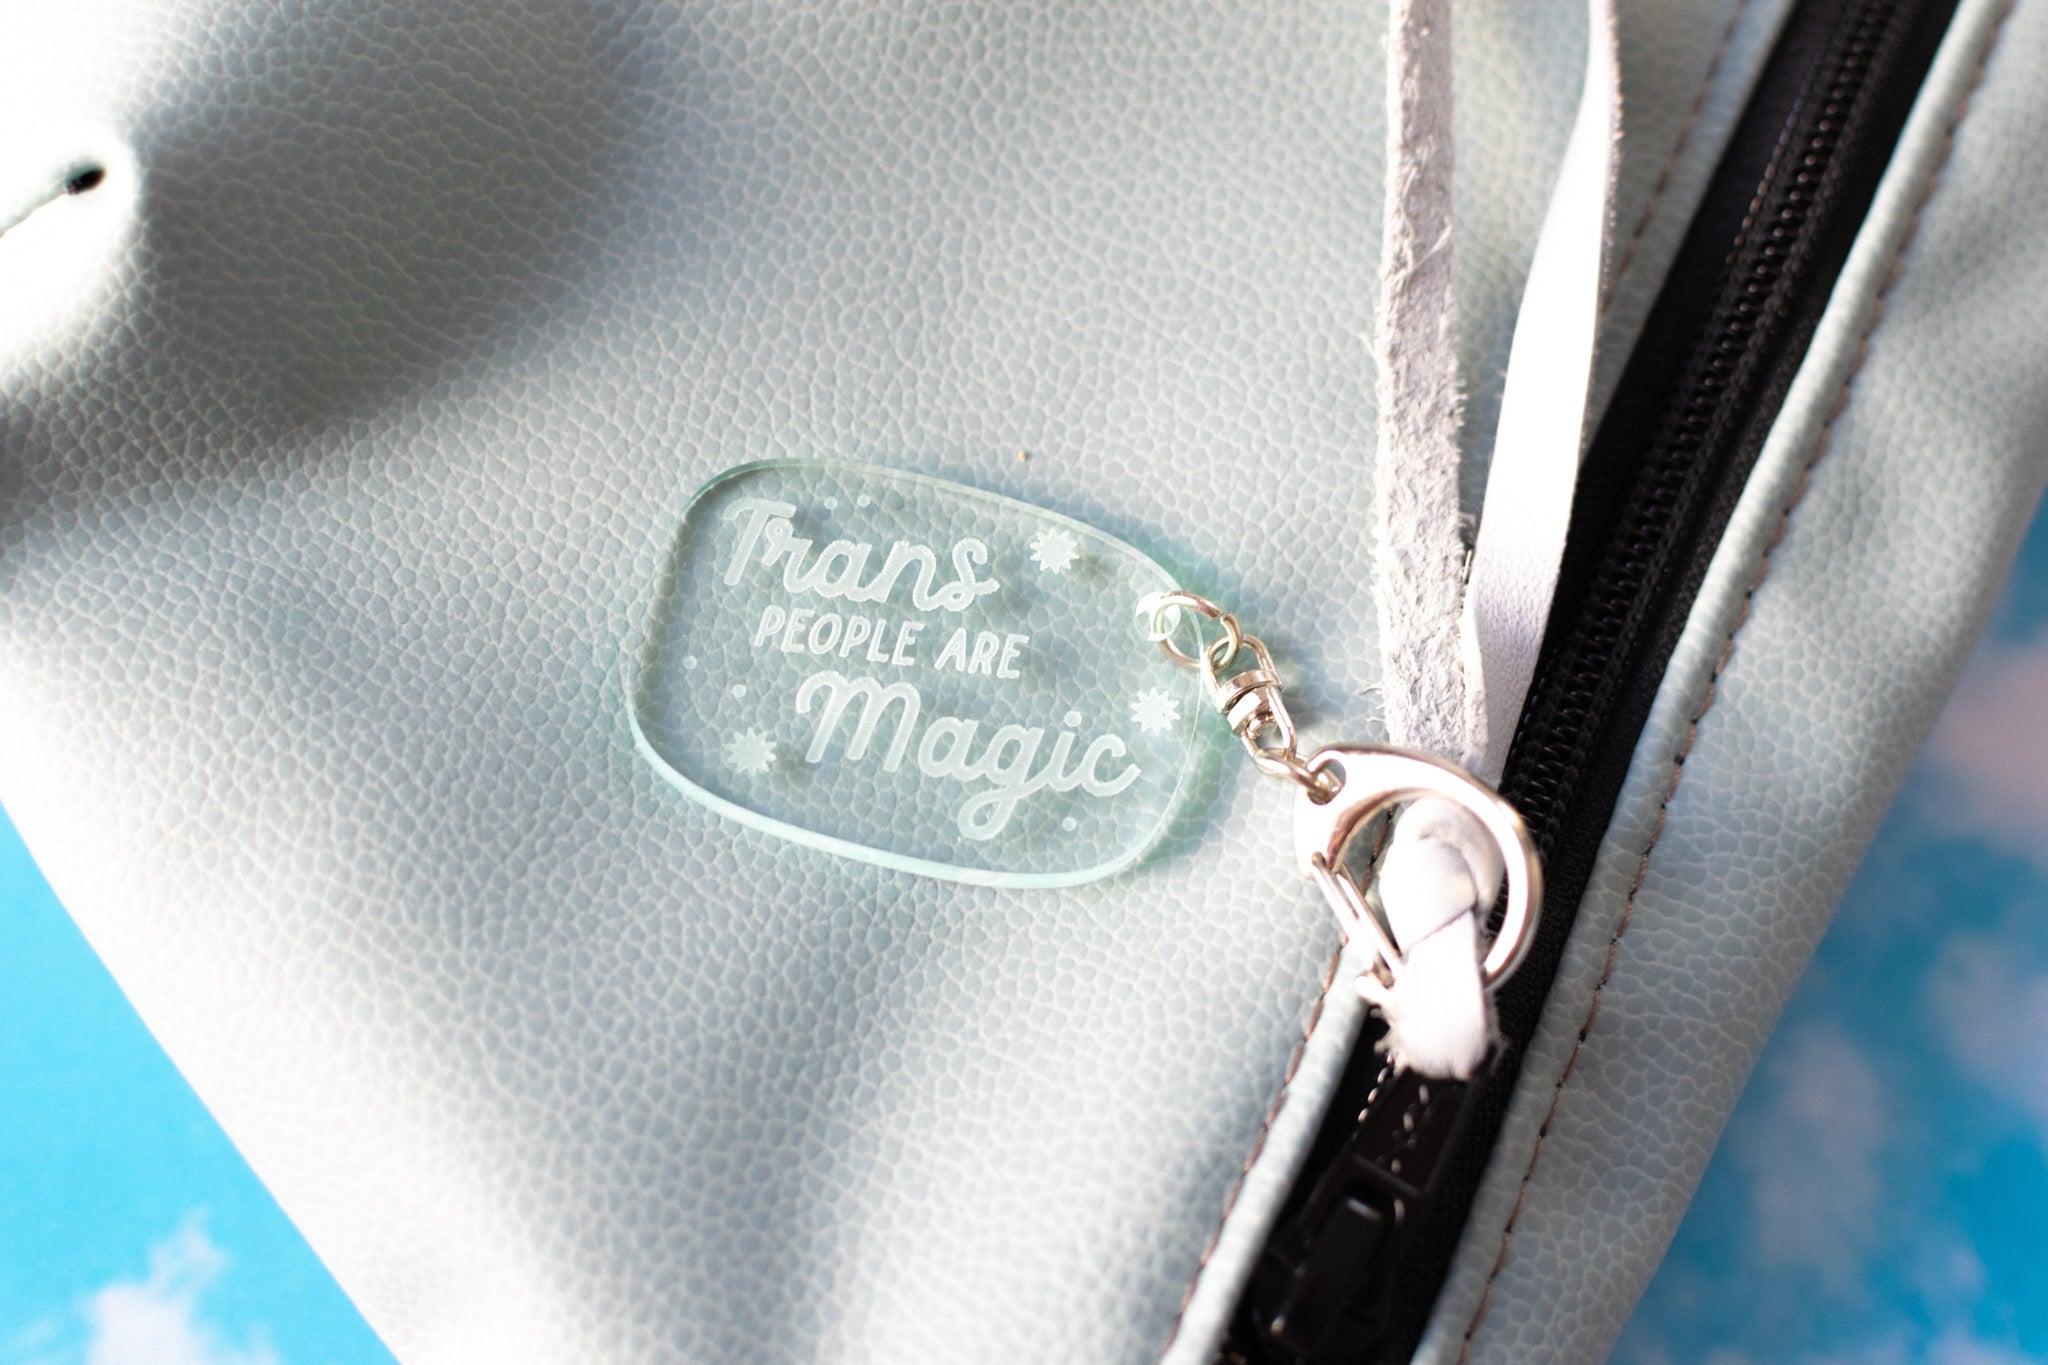 Trans people are magic keychains